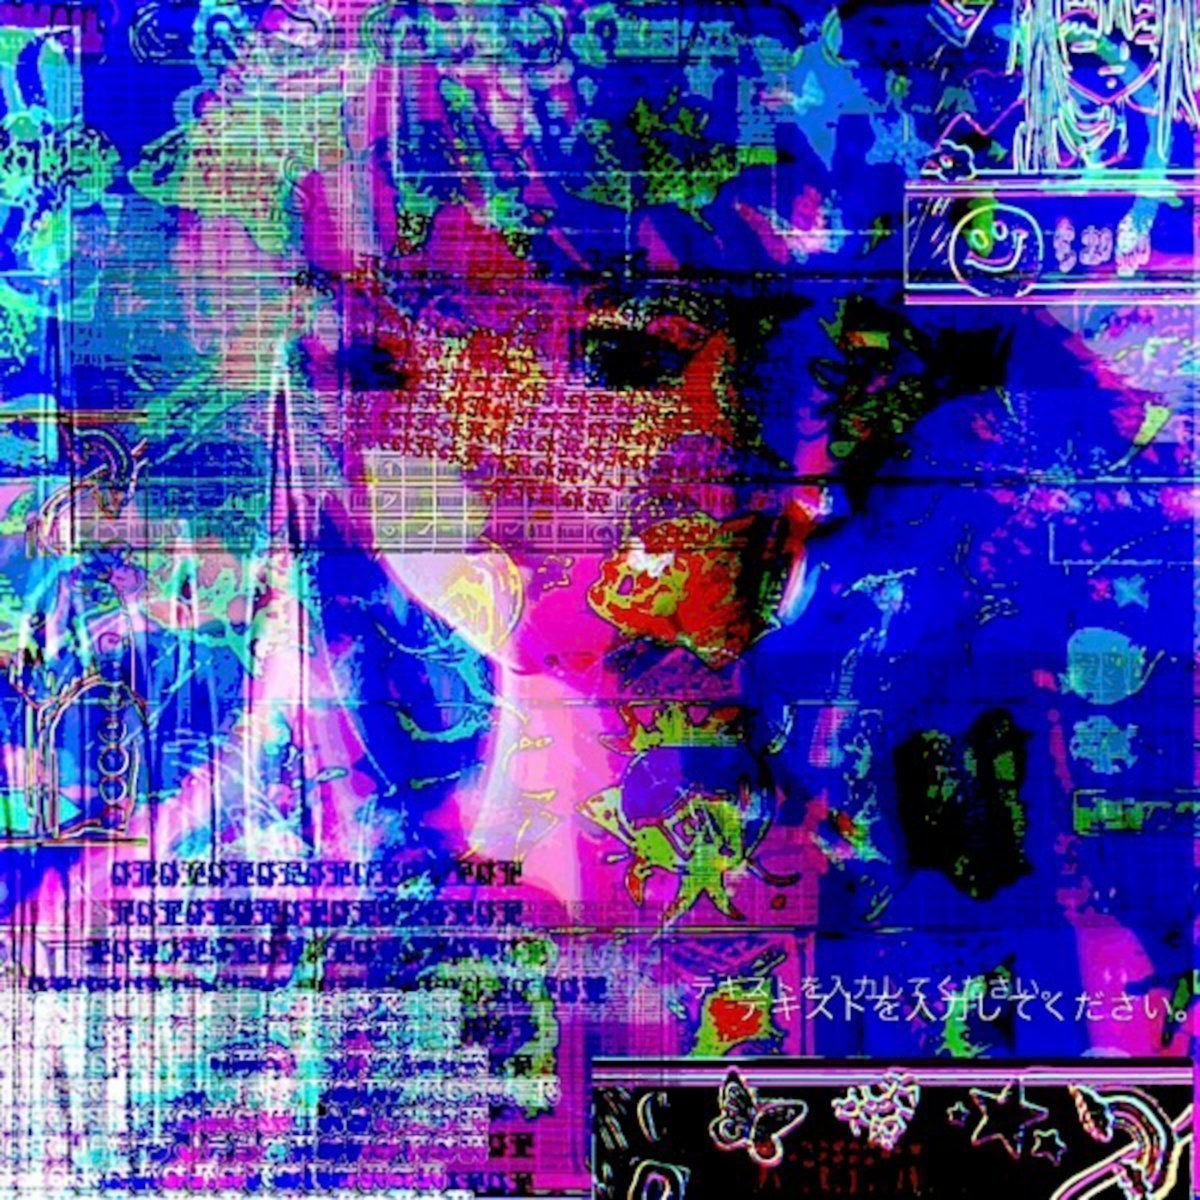 A colorful and abstract image of a woman's face with various symbols and designs around it. - Glitchcore